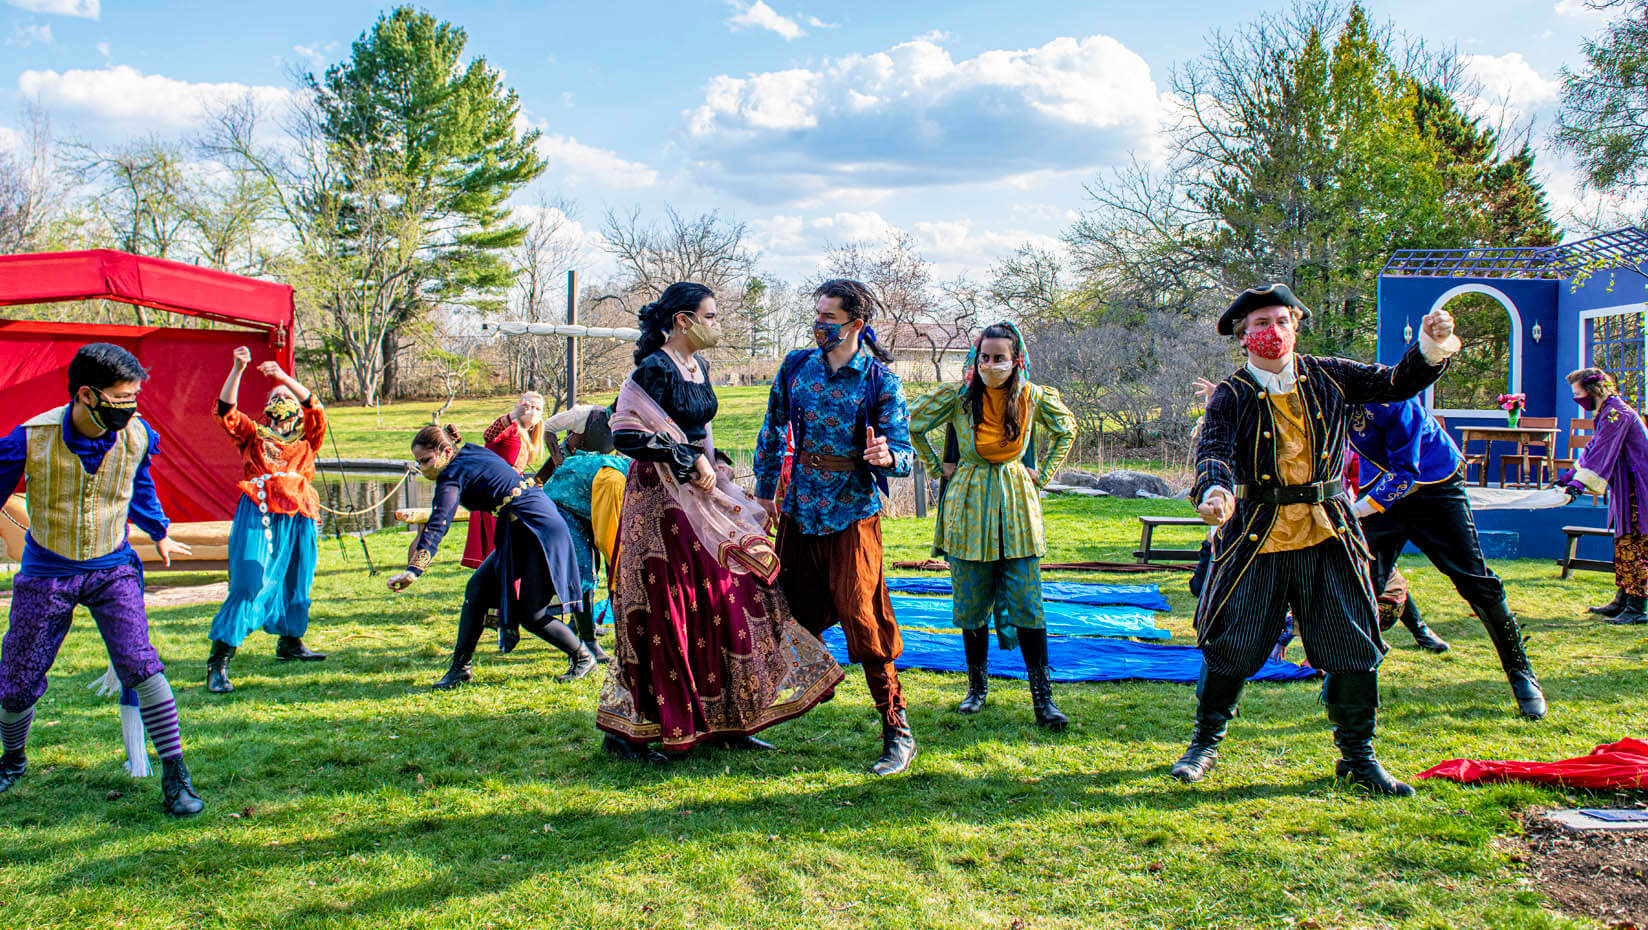 UMaine students perform in a garden on campus.